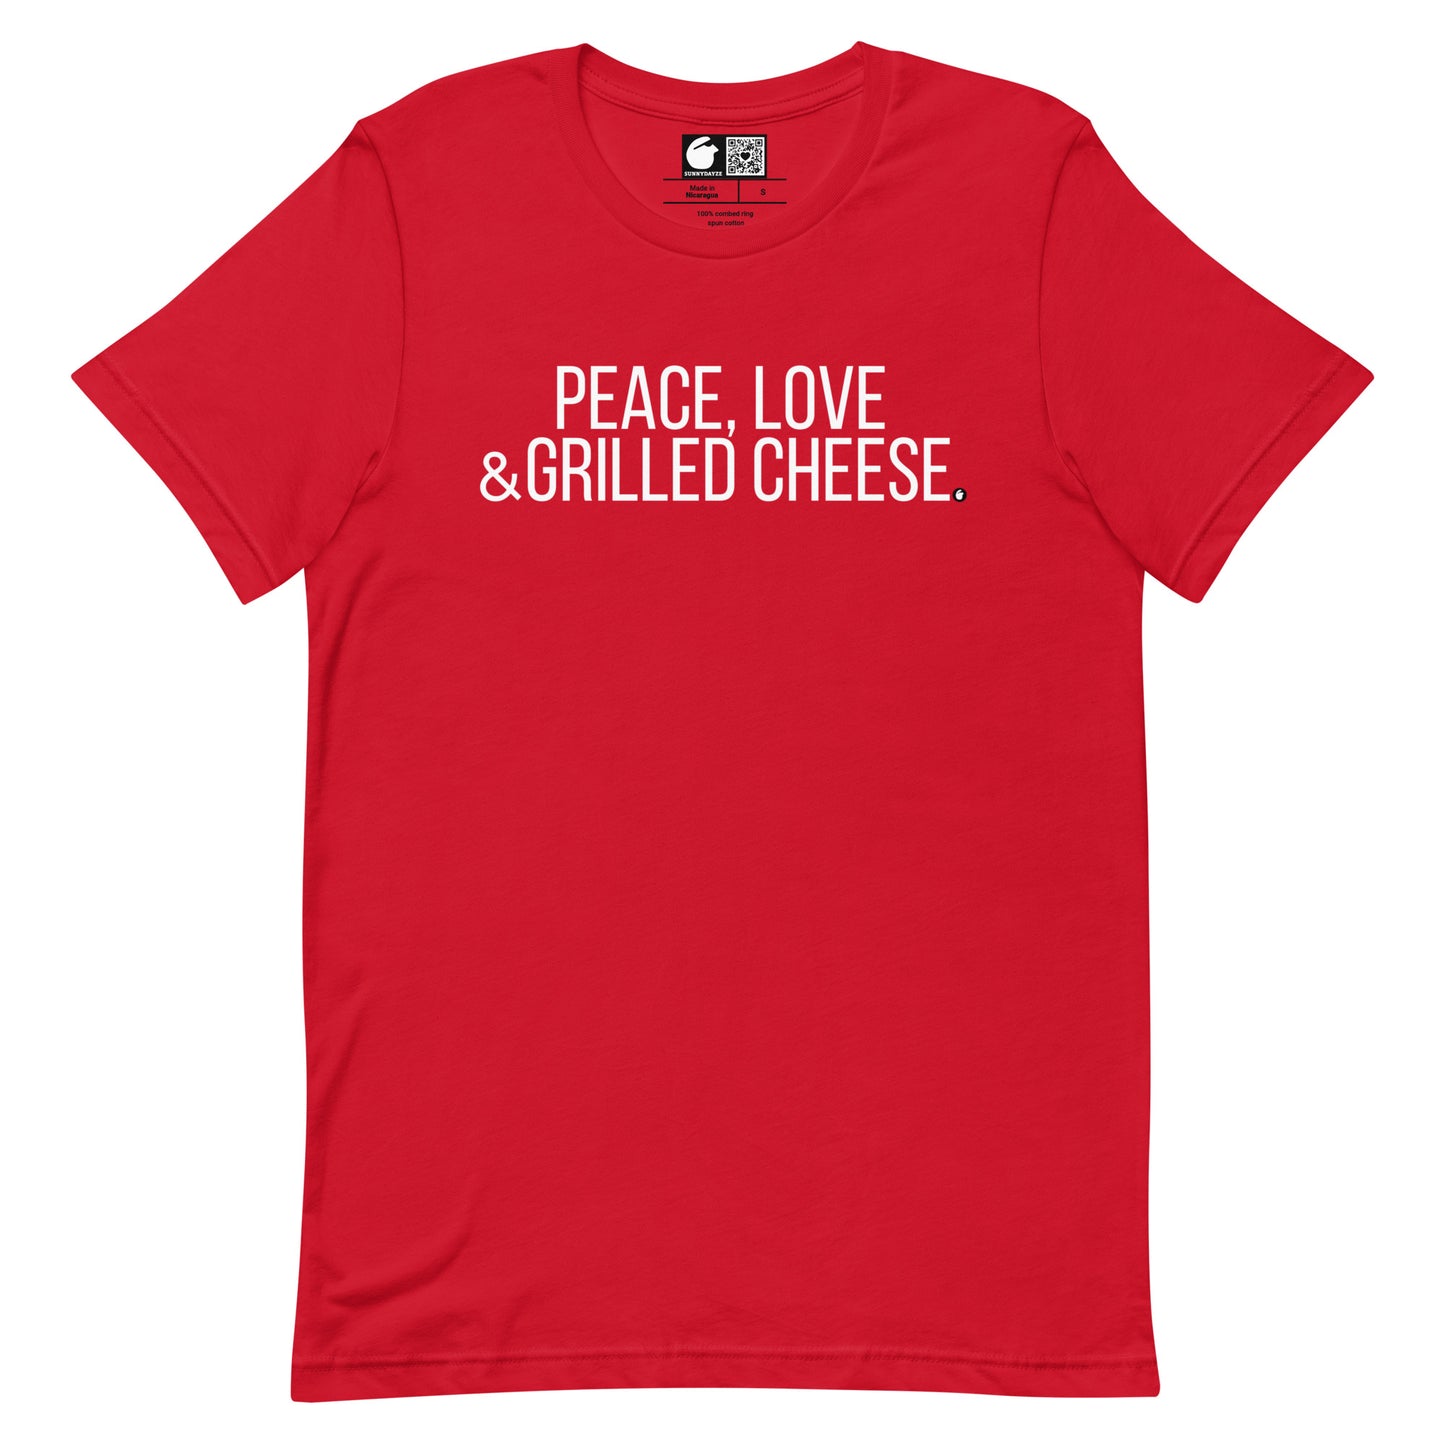 GRILLED CHEESE Short-Sleeve Unisex t-shirt